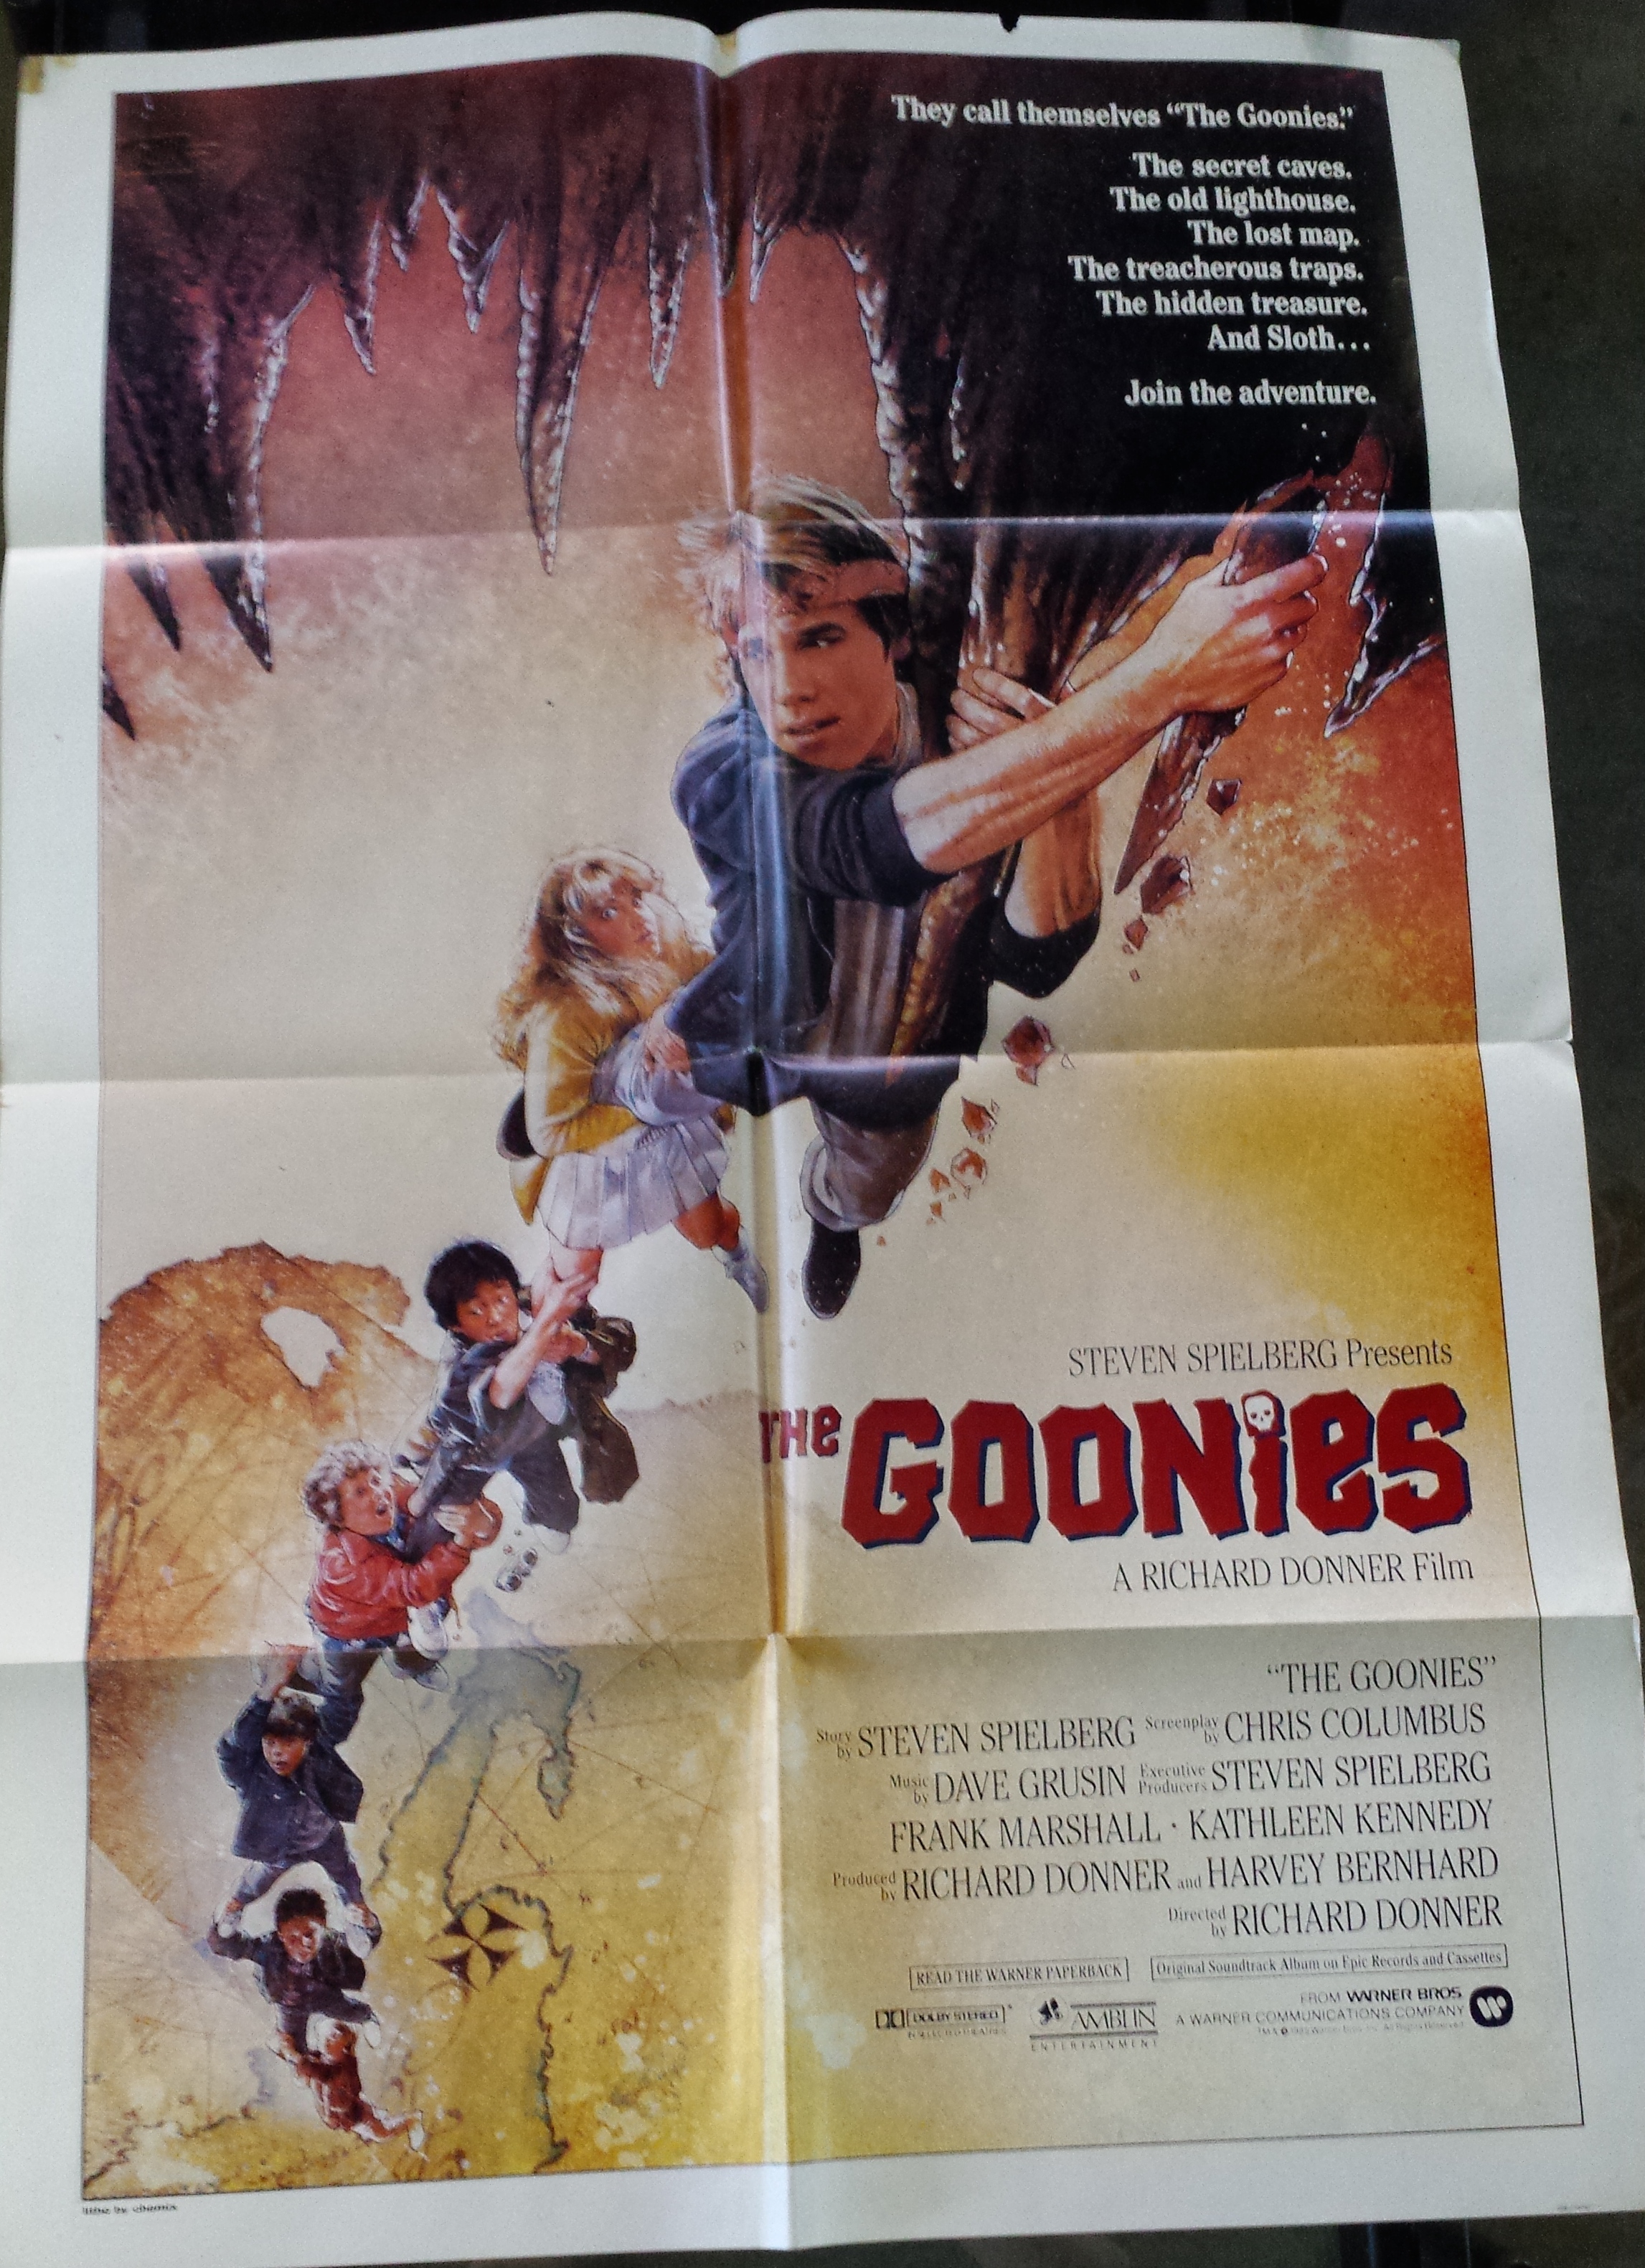 A Vintage The Goonies Film Poster Warner Brother Films. Crease fold tears x3. 1010 x 700mm